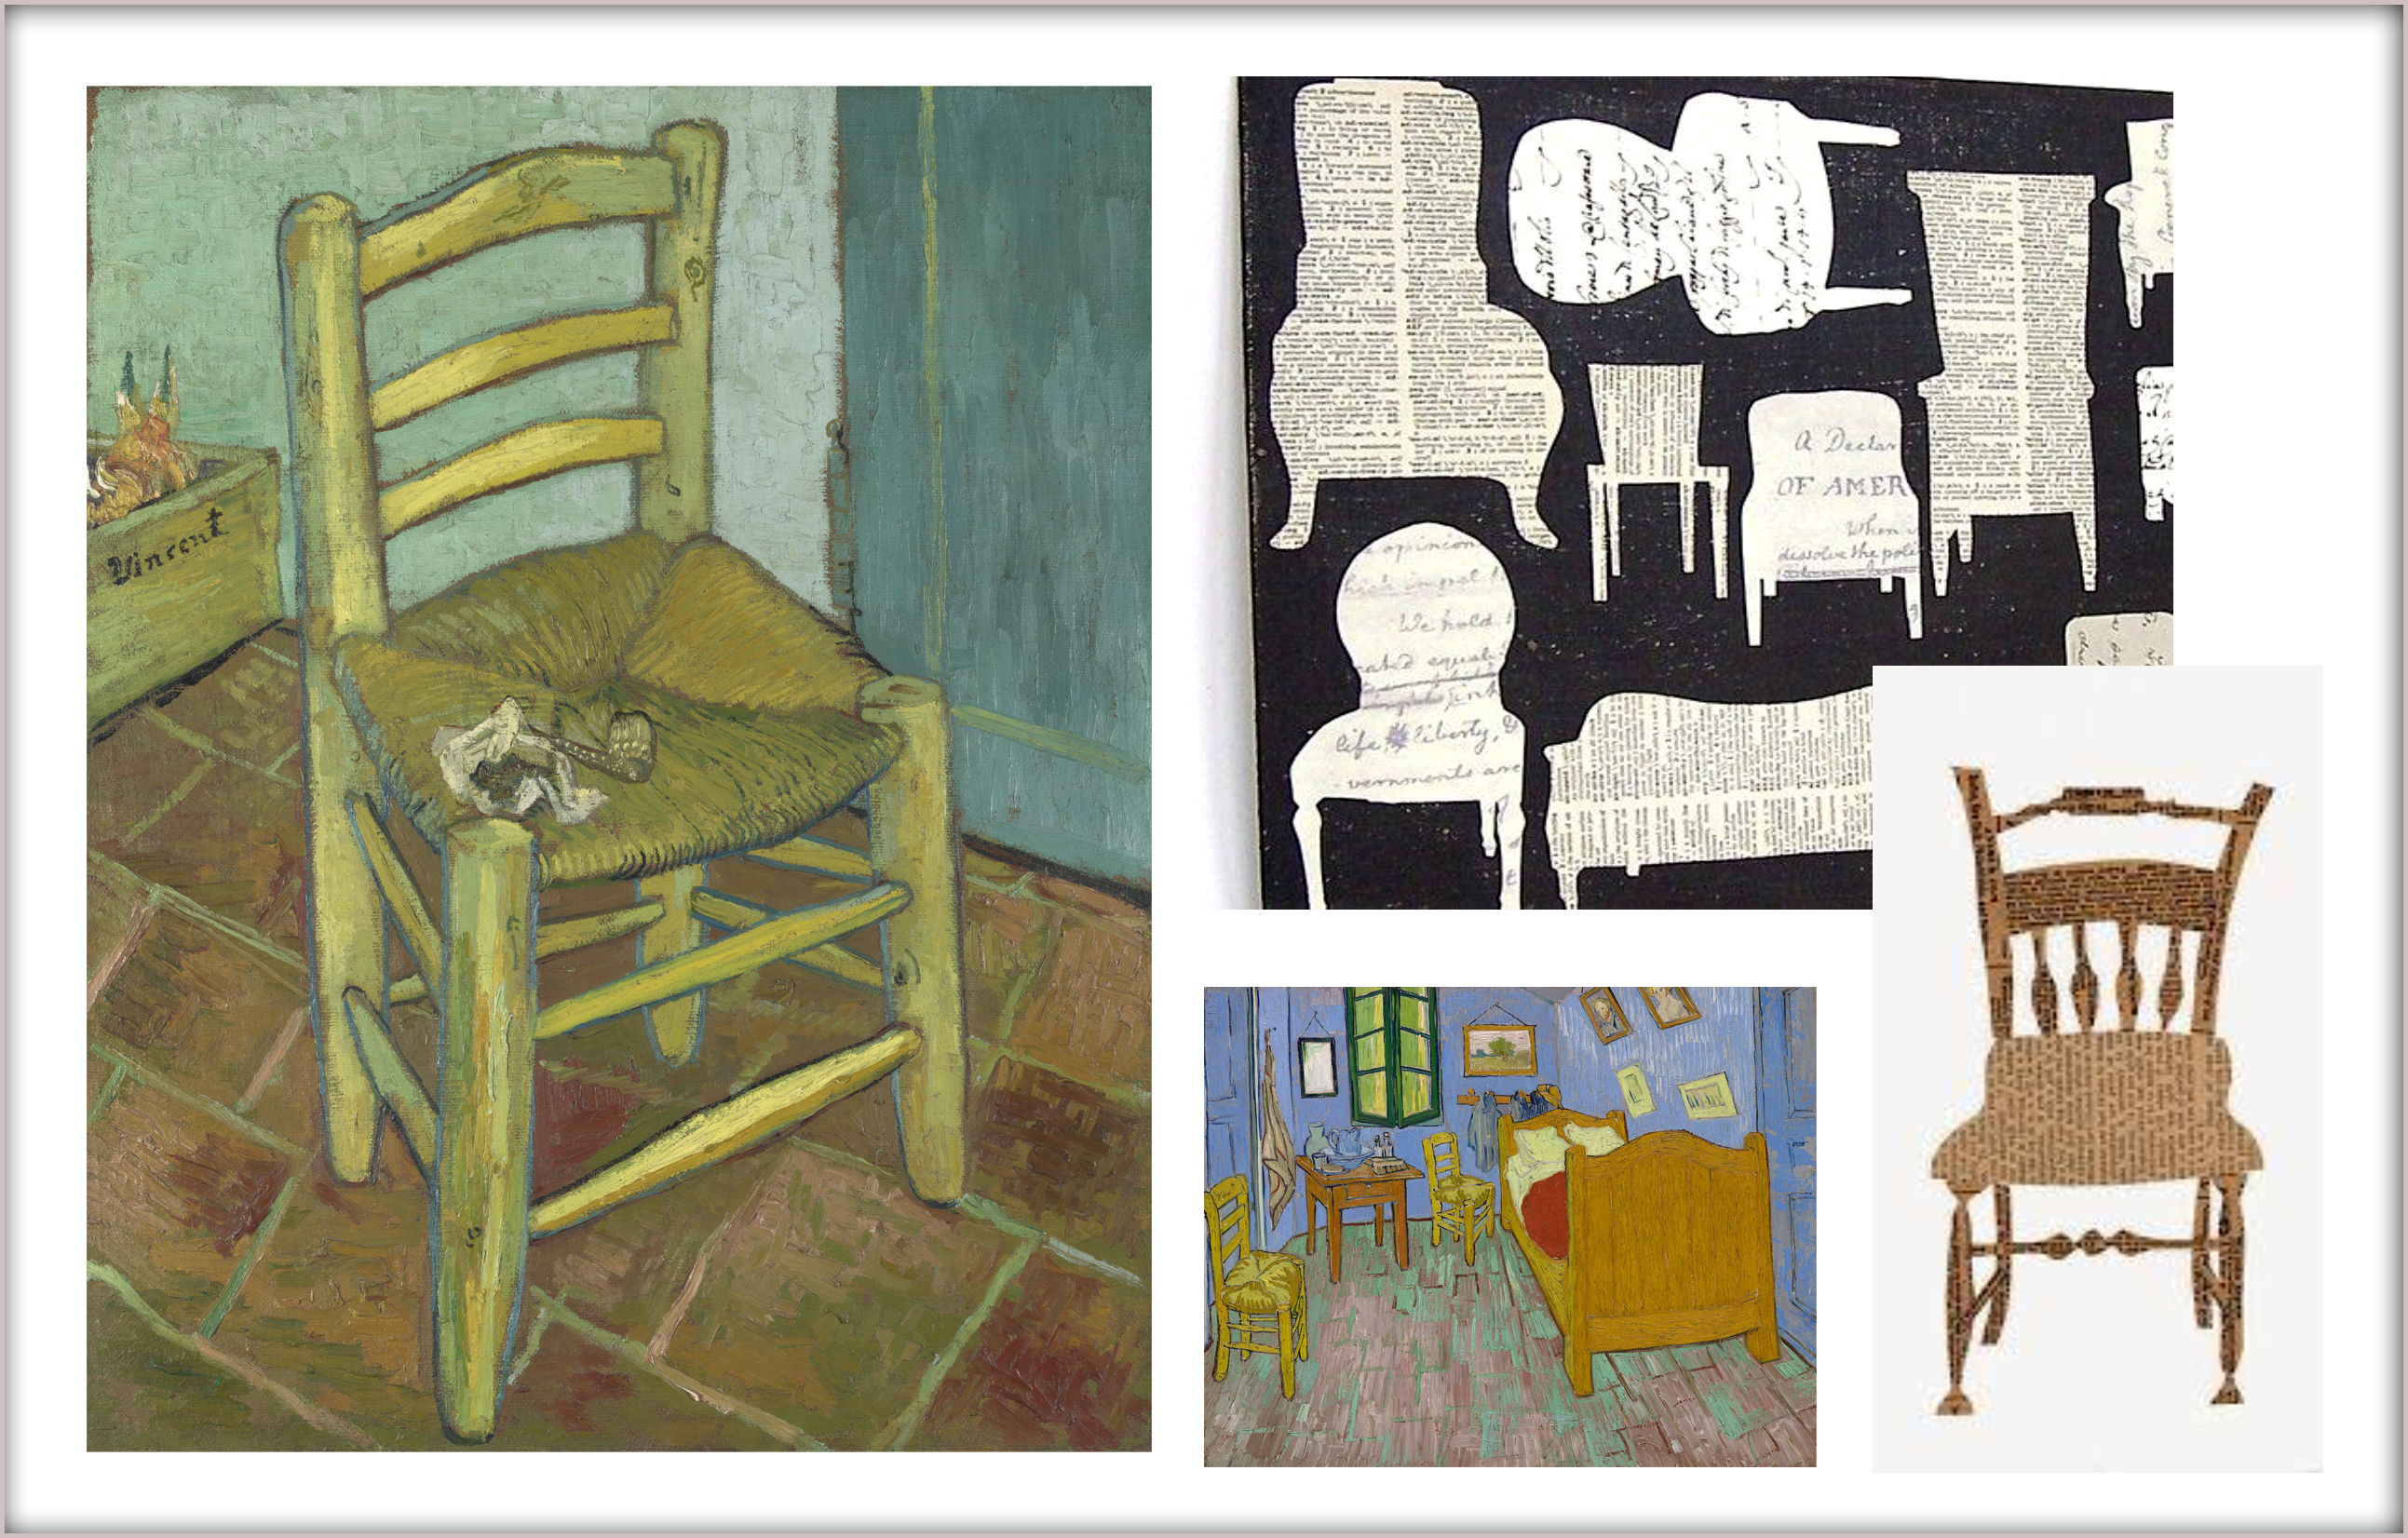 Van Gogh chair paintings as well as print and collage art pieces inspired by paintings